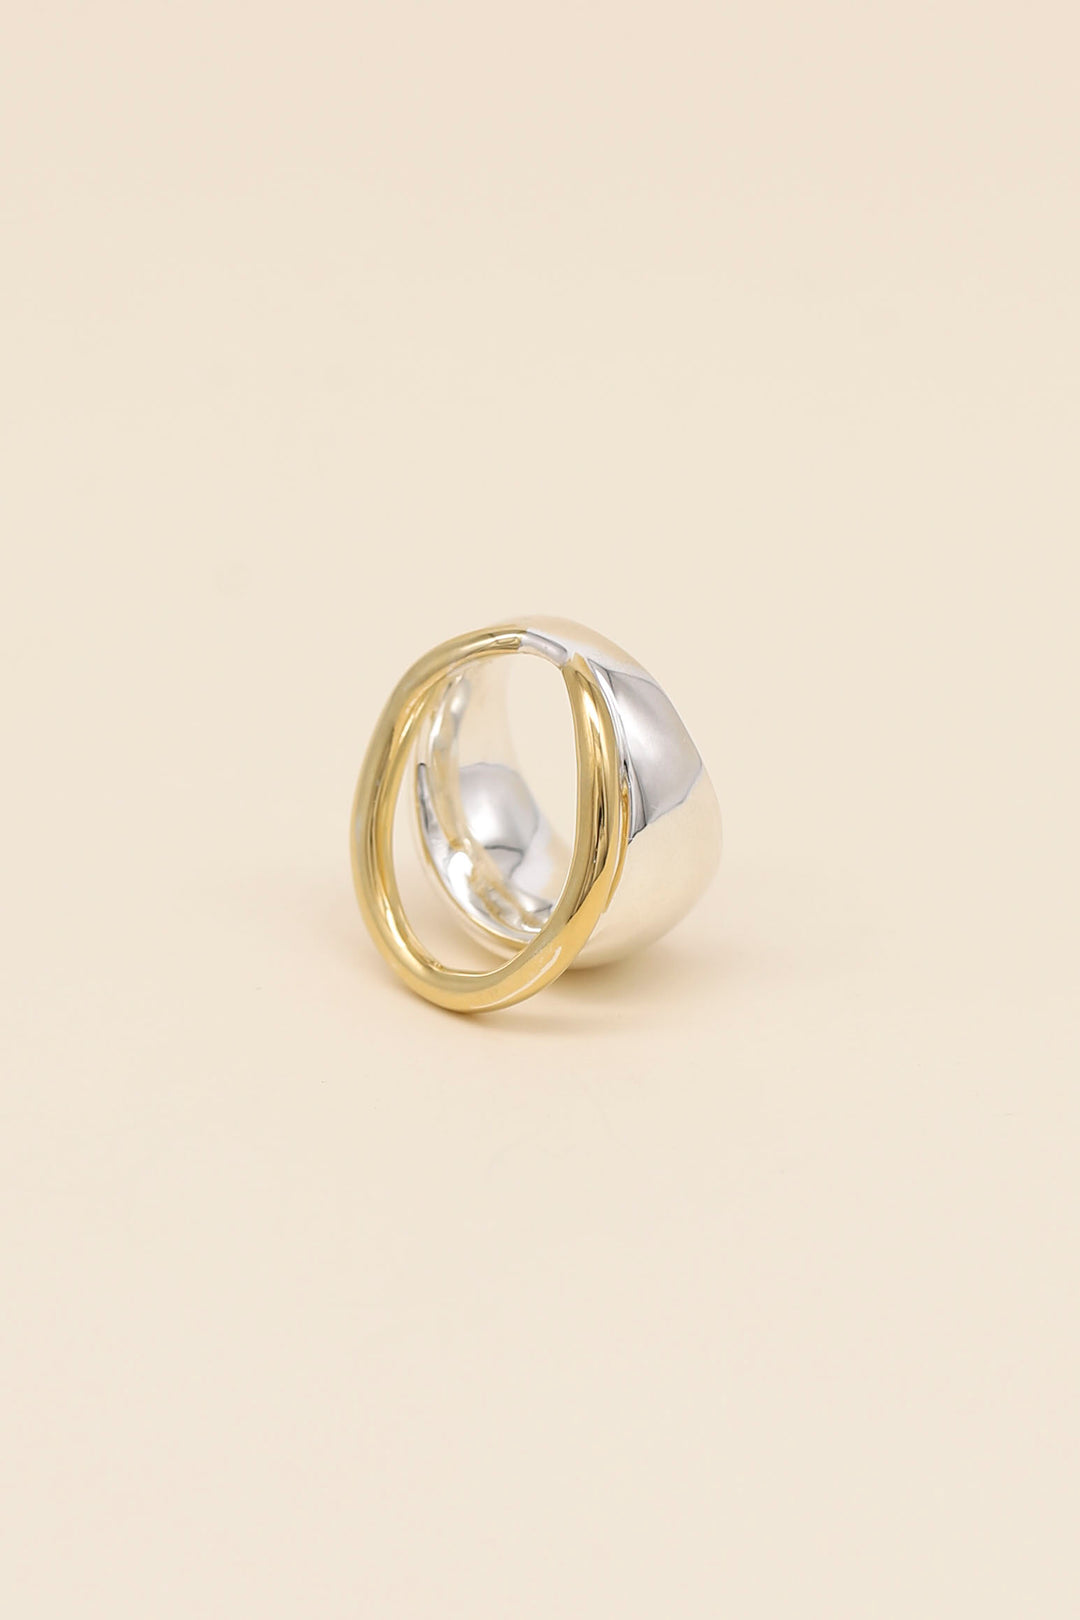 Sprout / SP-R11 / RING